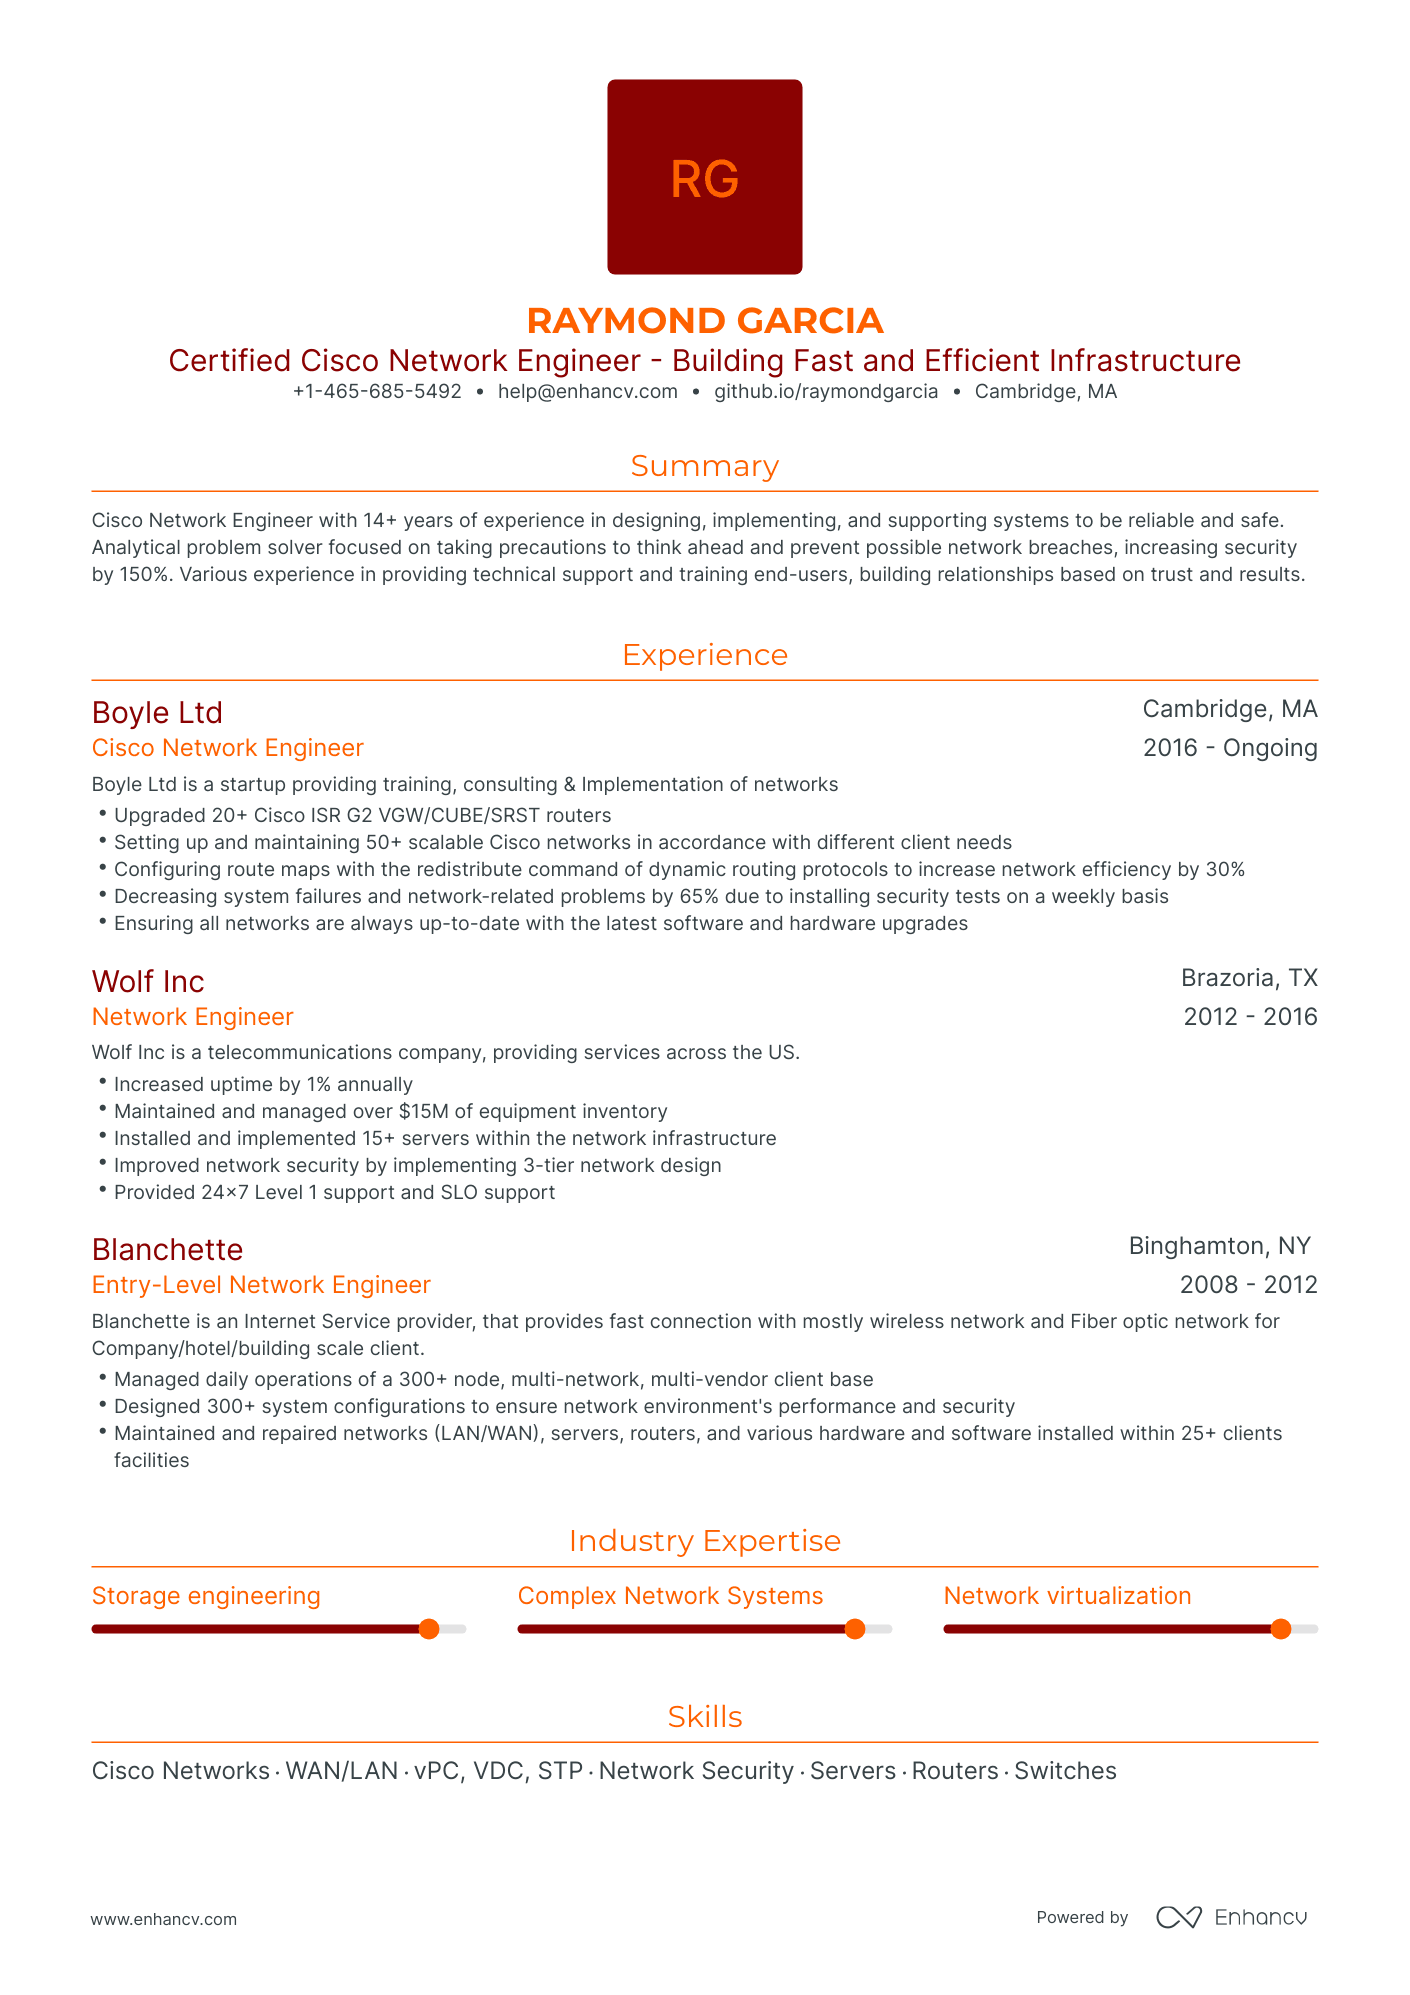 Traditional Cisco Network Engineer Resume Template